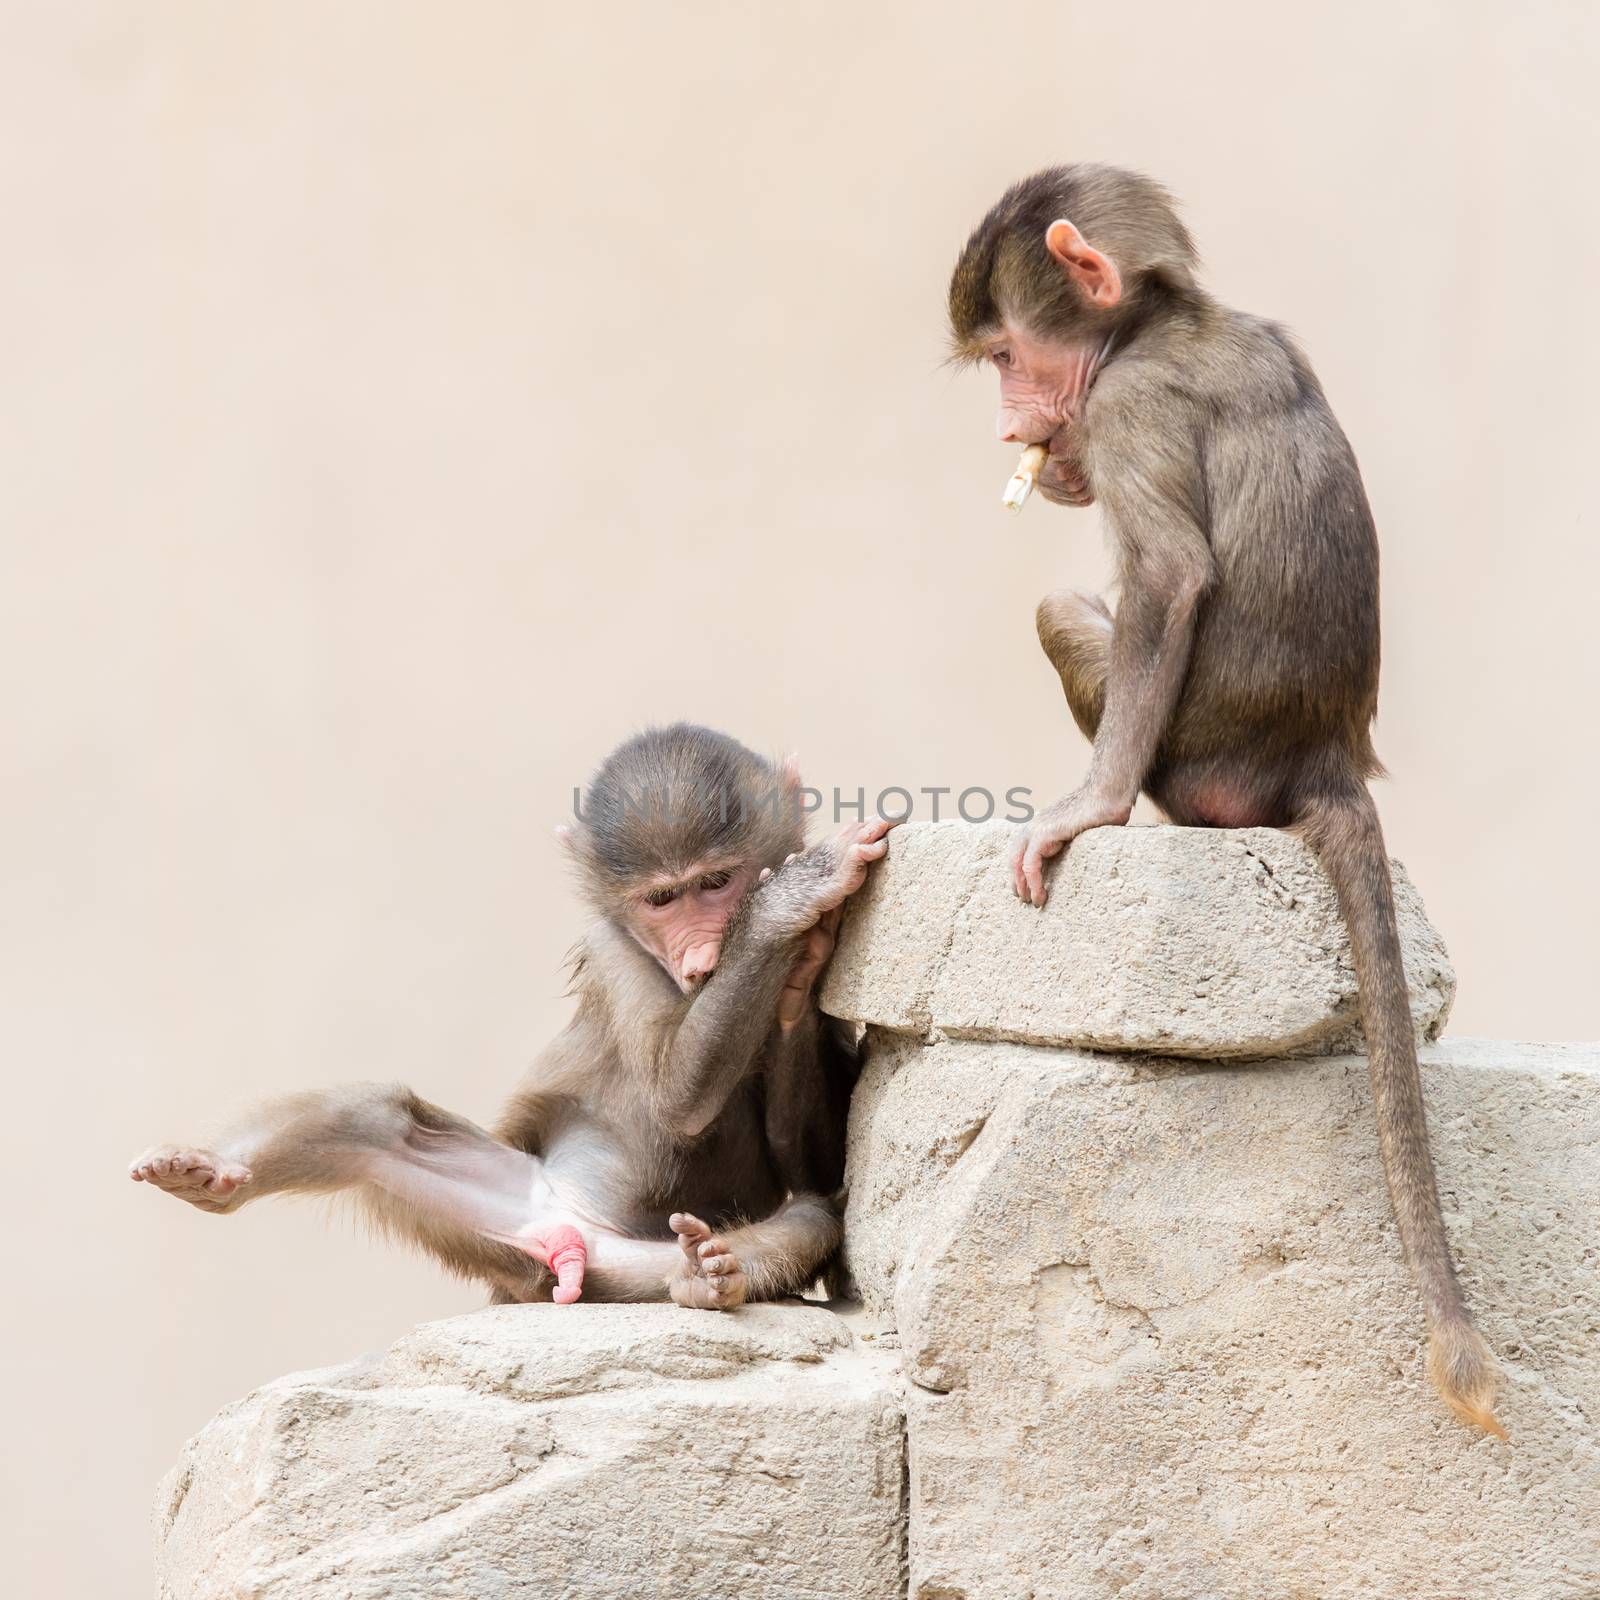 Baby baboon learning to eat through play by michaklootwijk